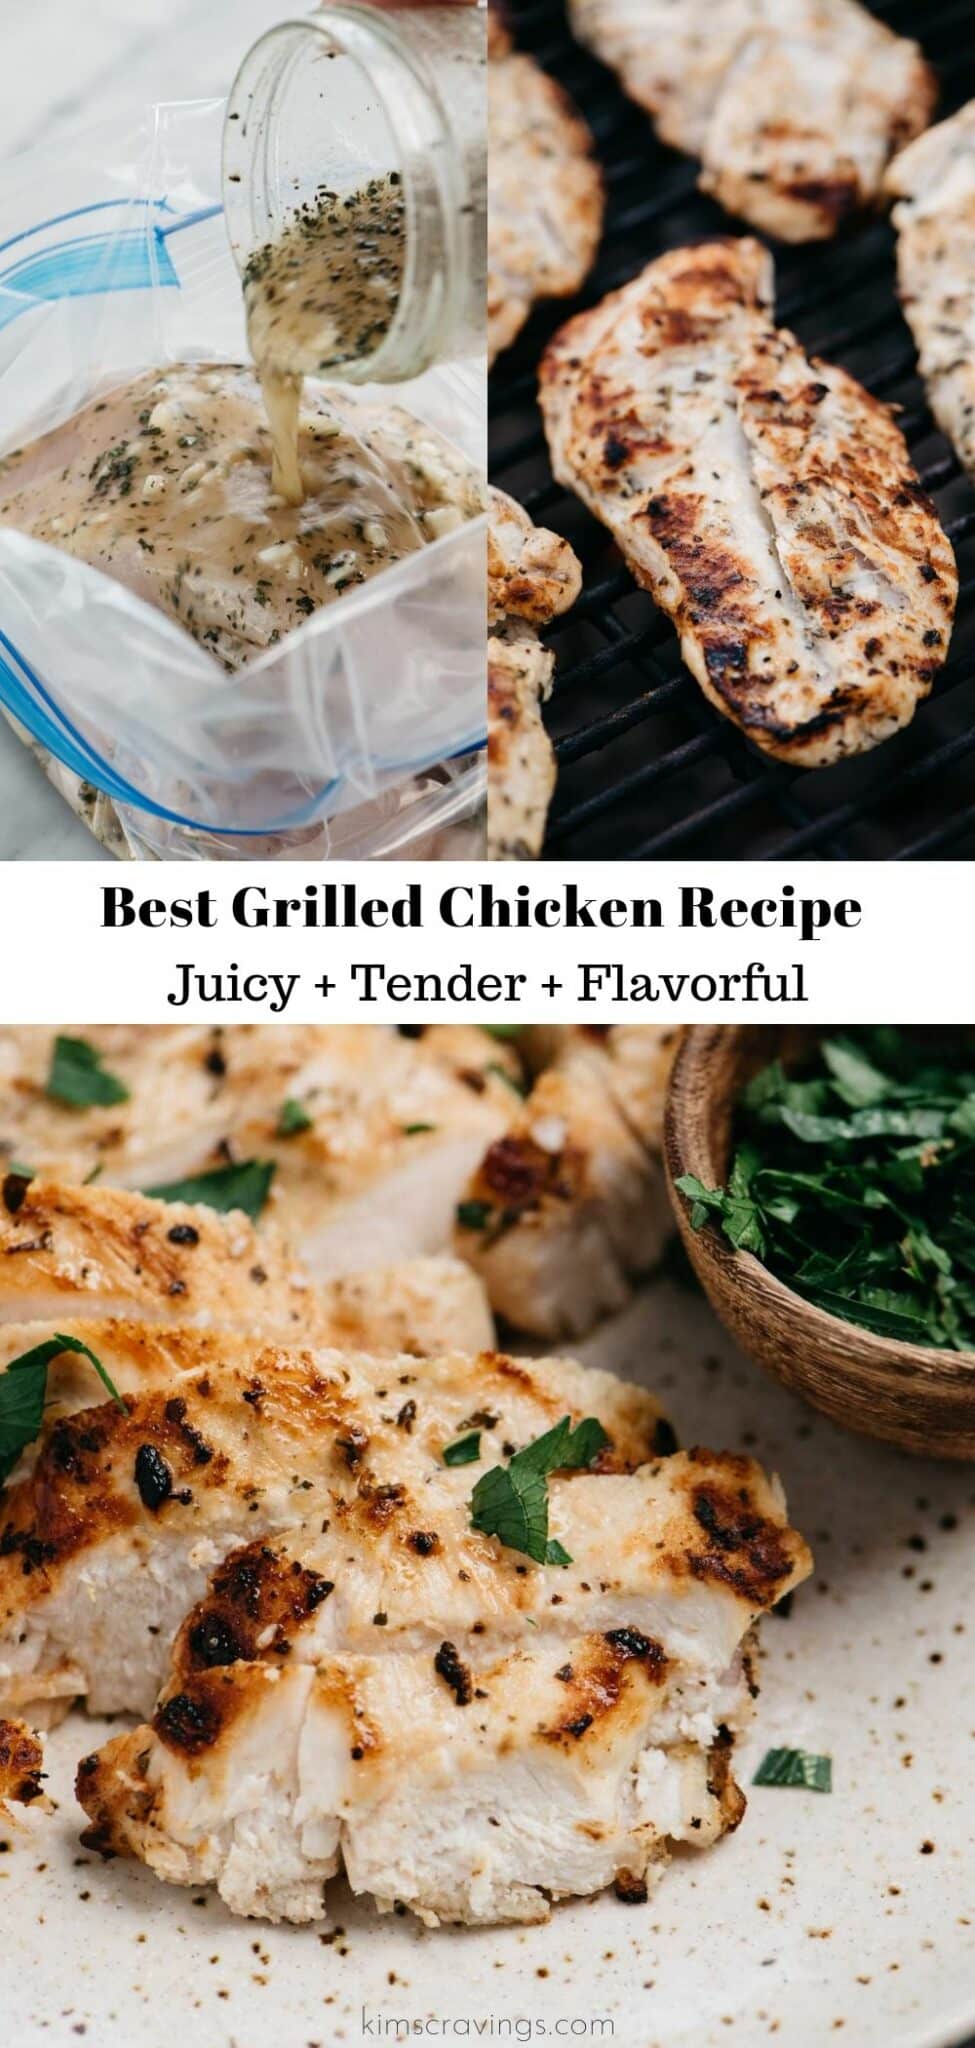 easy grilled chicken recipe shown marinating